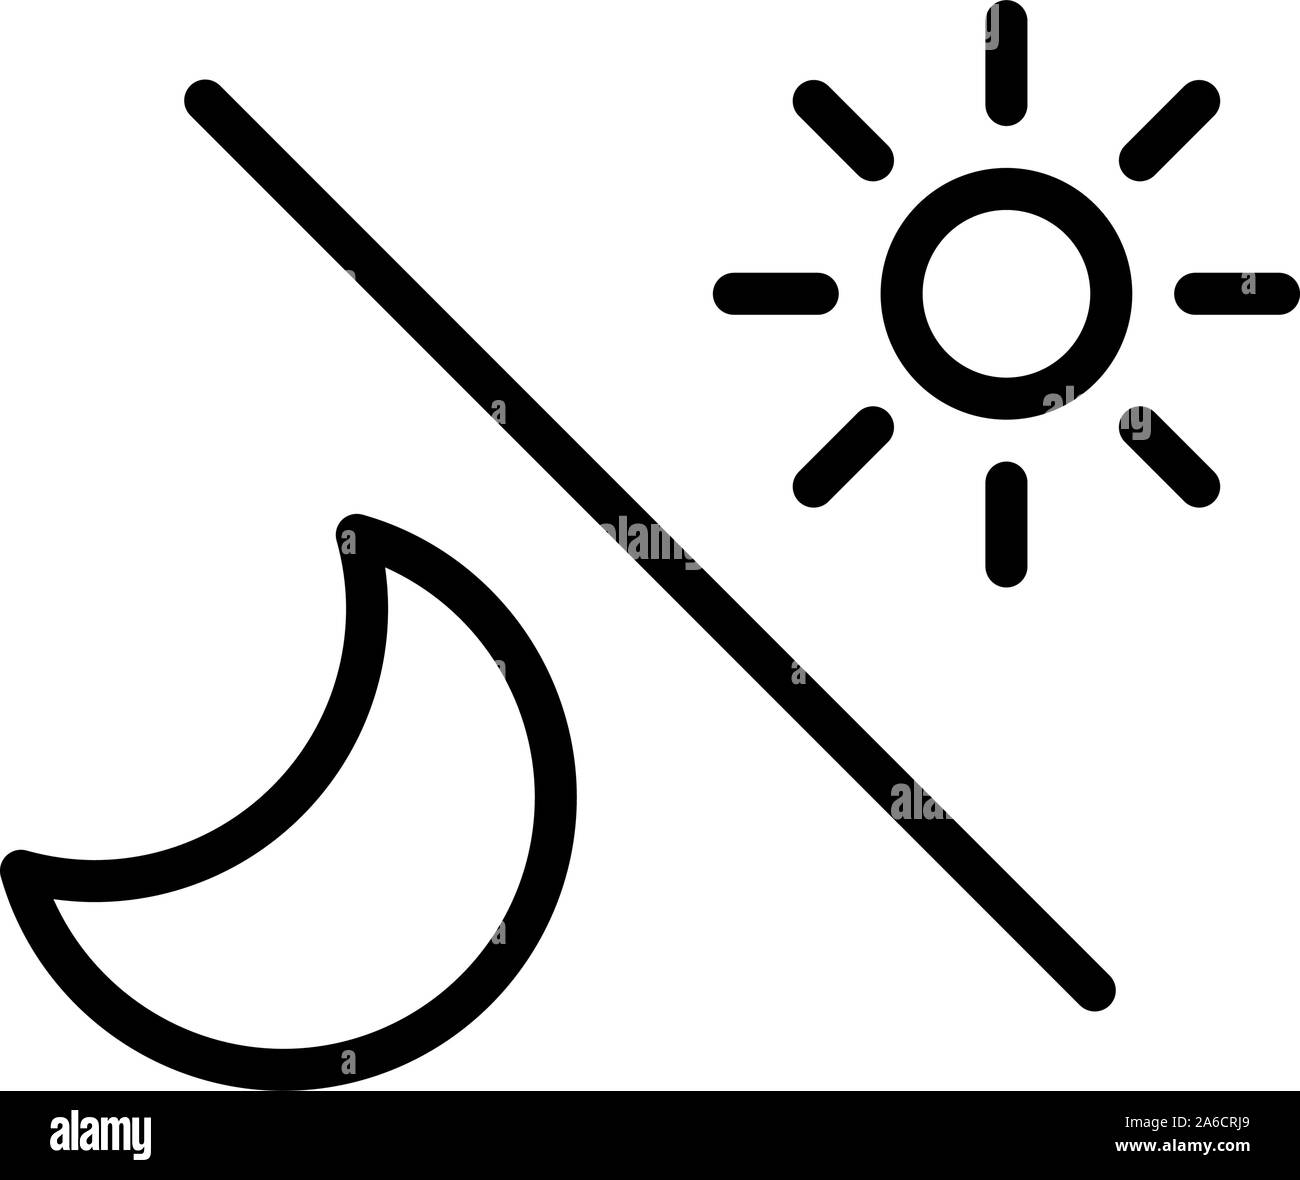 Sun And Moon Icon Vector. Sign of Sun and Moon Illustration isolated on white background Stock Vector